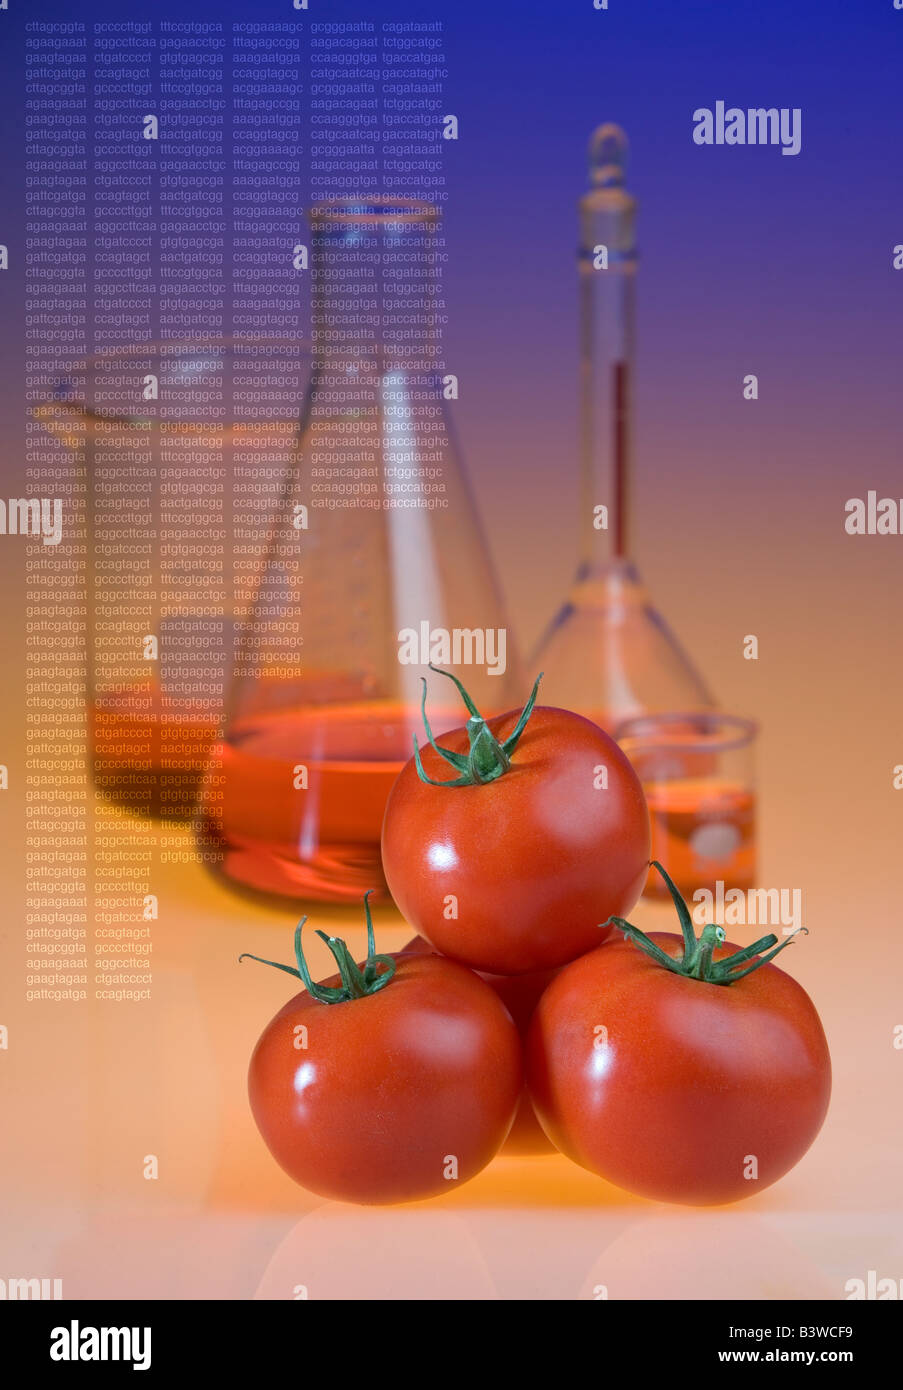 Concept shot of genetically modified tomatoes showing beakers and DNA sequence codes Genetically modified foods resist rot. Stock Photo